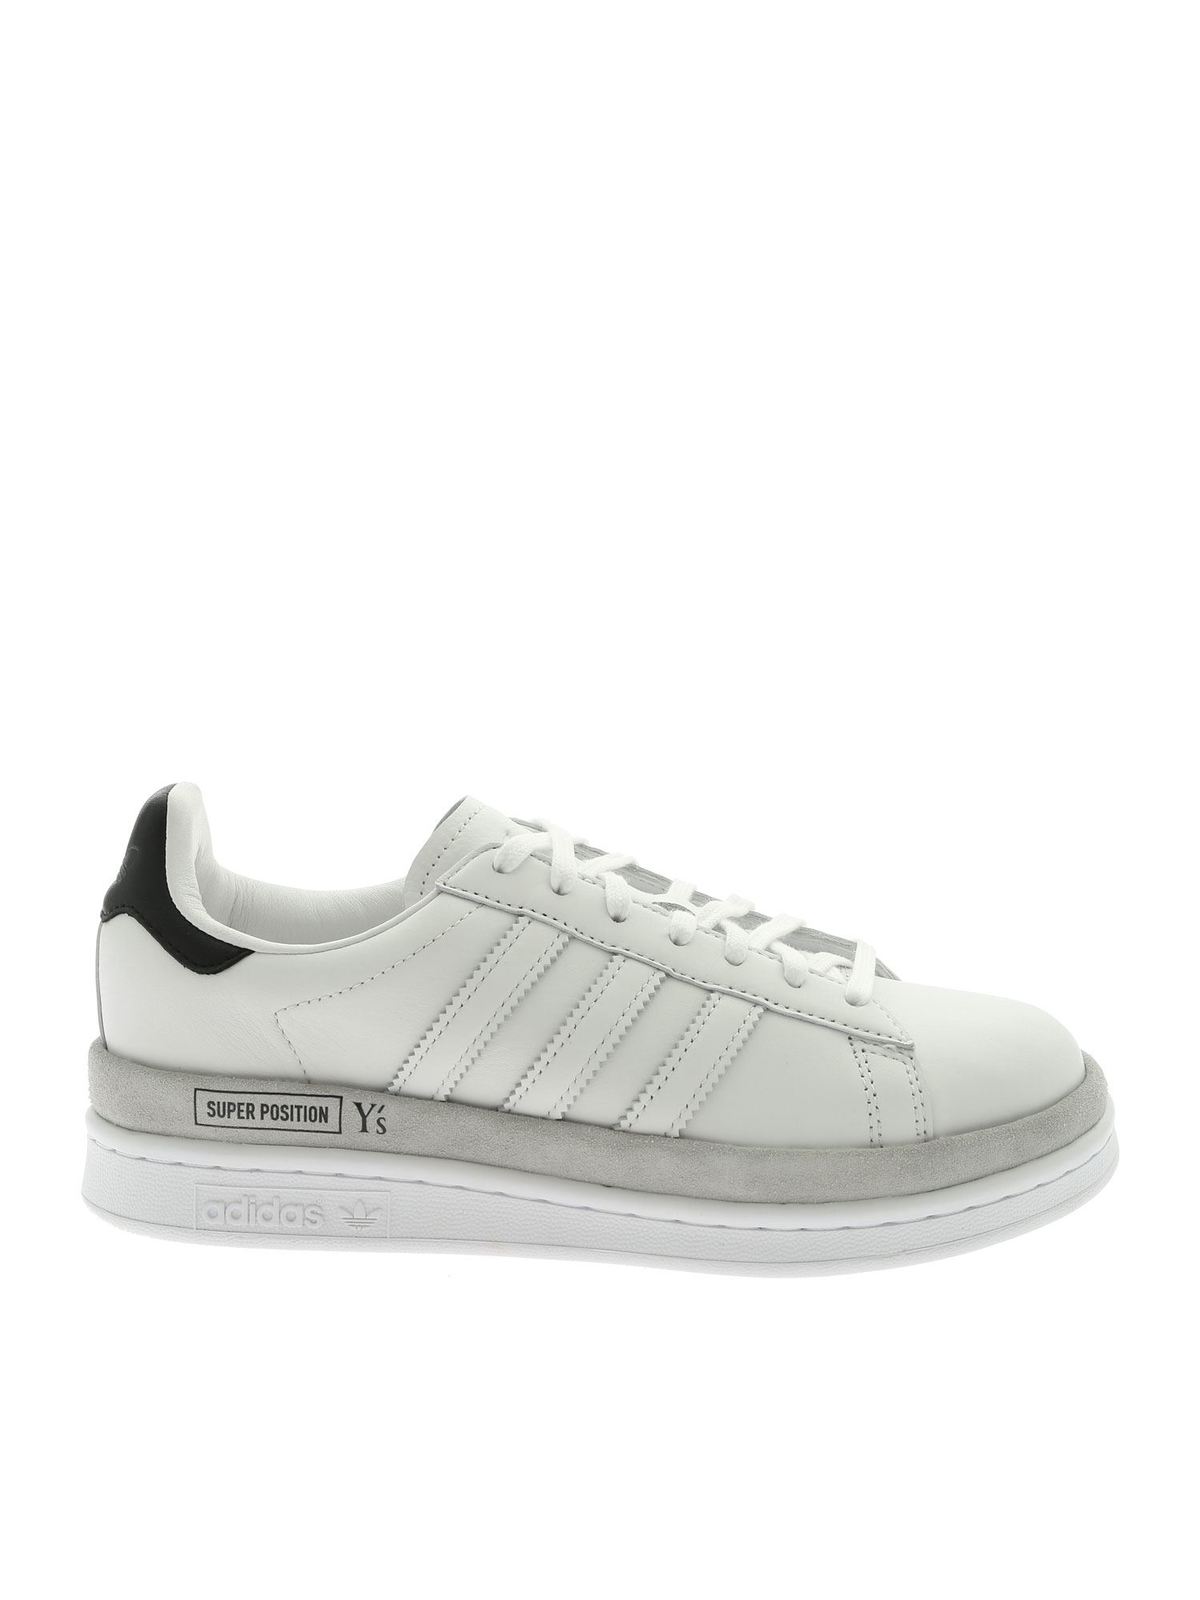 Adidas - Ys Wedge Stan sneakers in white - trainers - EG1739 | iKRIX.com